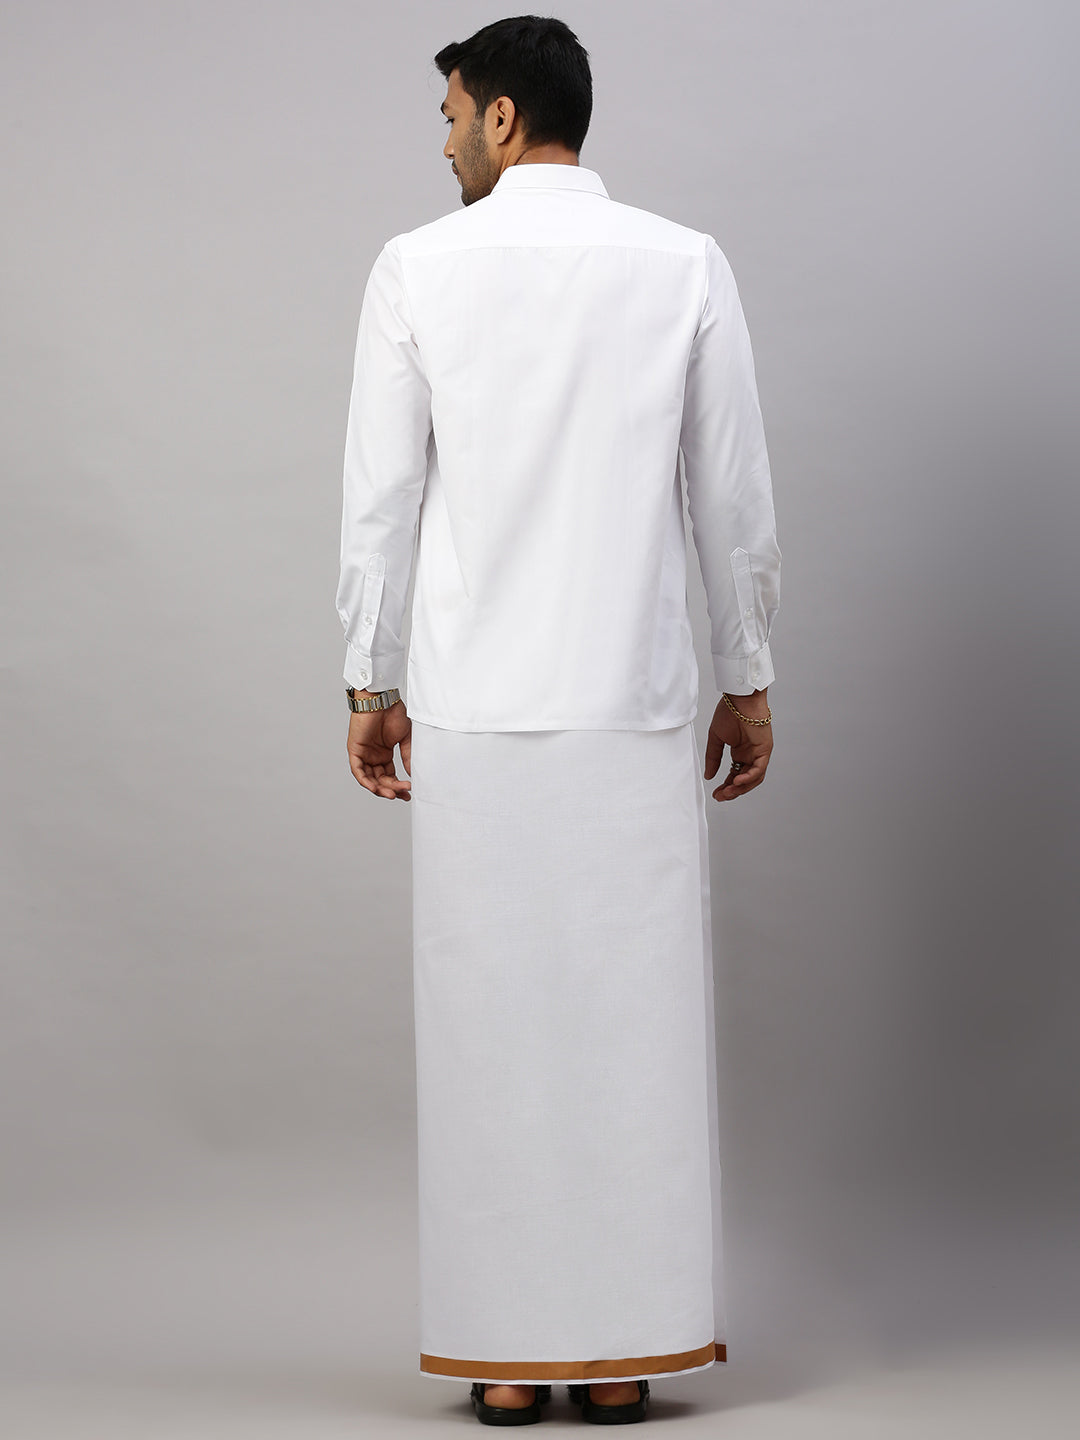 Mens Elegant Look Cotton Single Dhoti with Gold Fancy Border